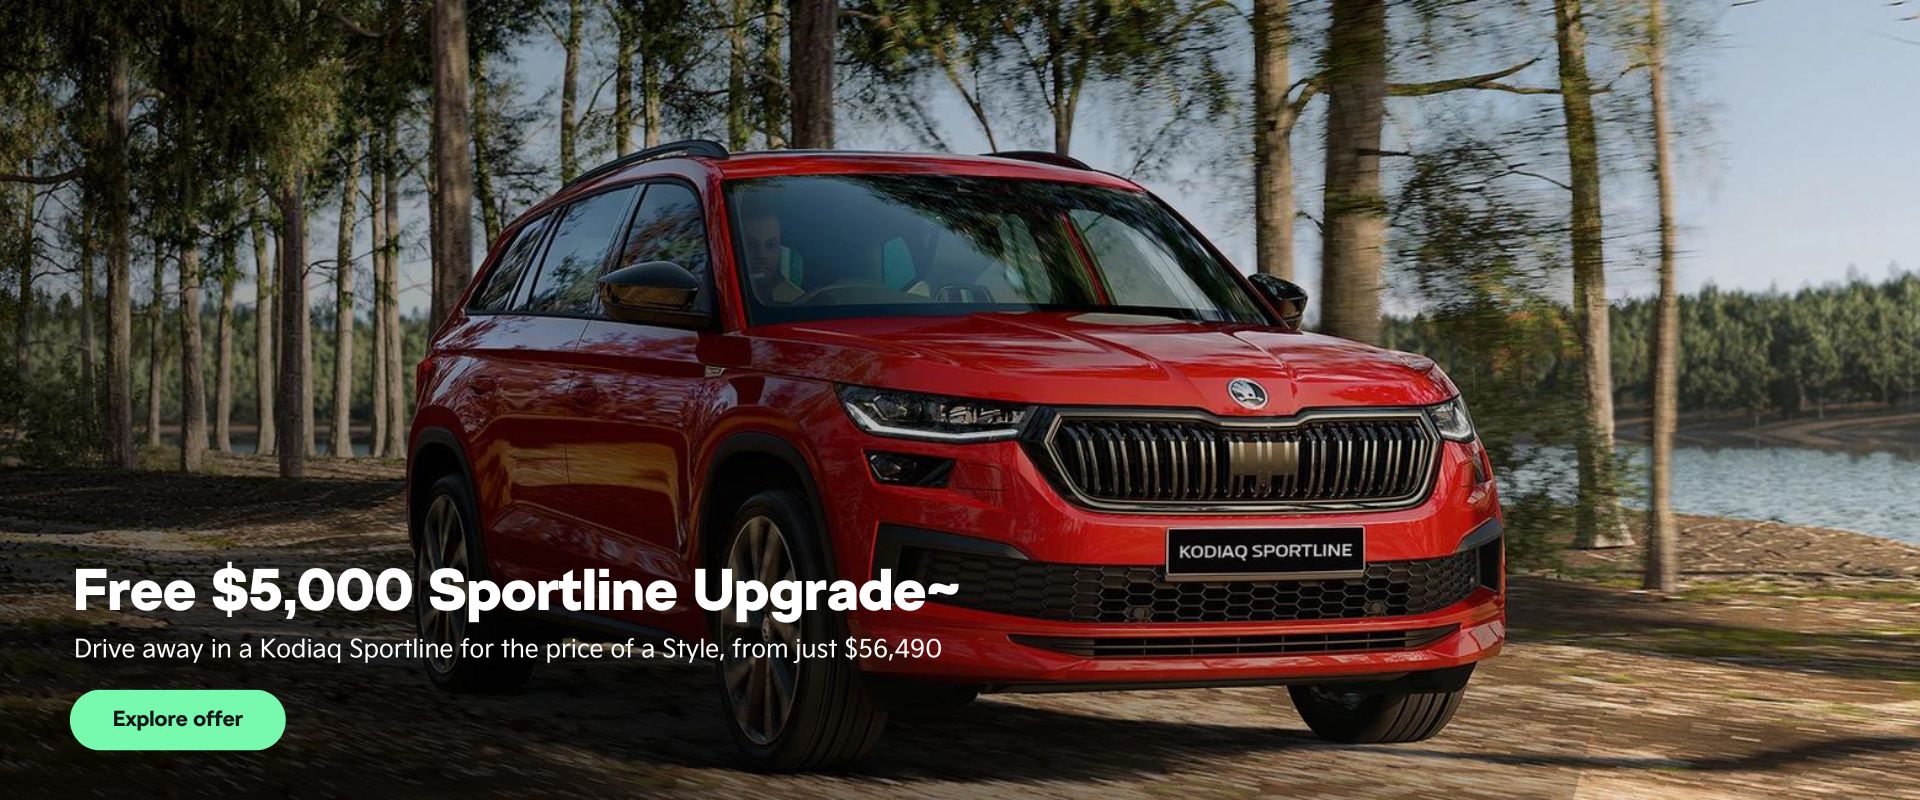 Free $5,000 Sportline Upgrade~. Drive away in a Kodiaq Sportline for the price of a Style, from just $56,490